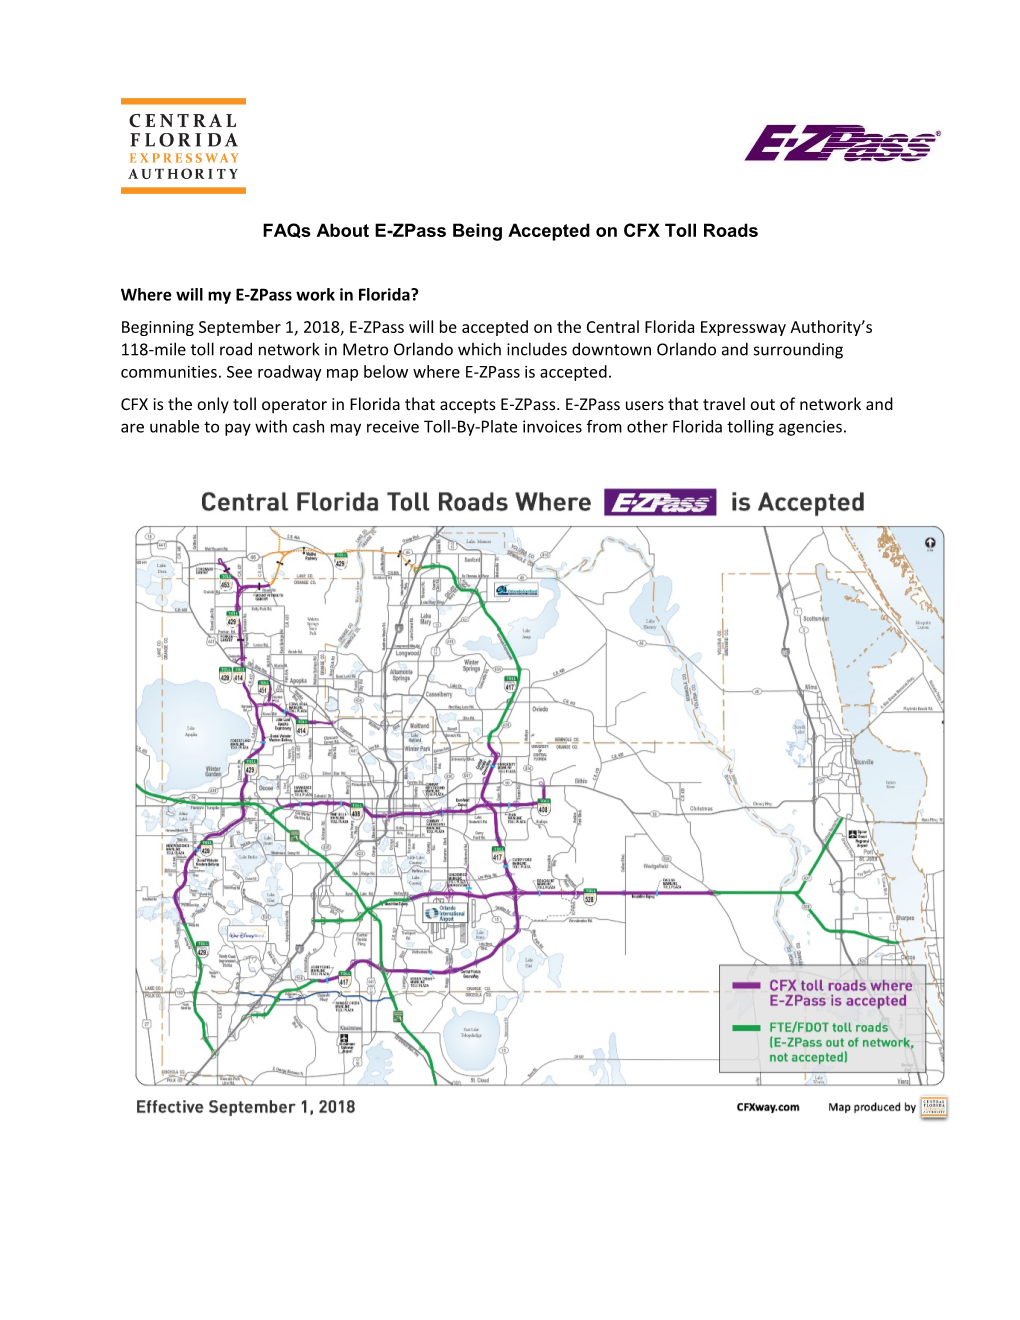 Faqs About E-Zpass Being Accepted on CFX Toll Roads